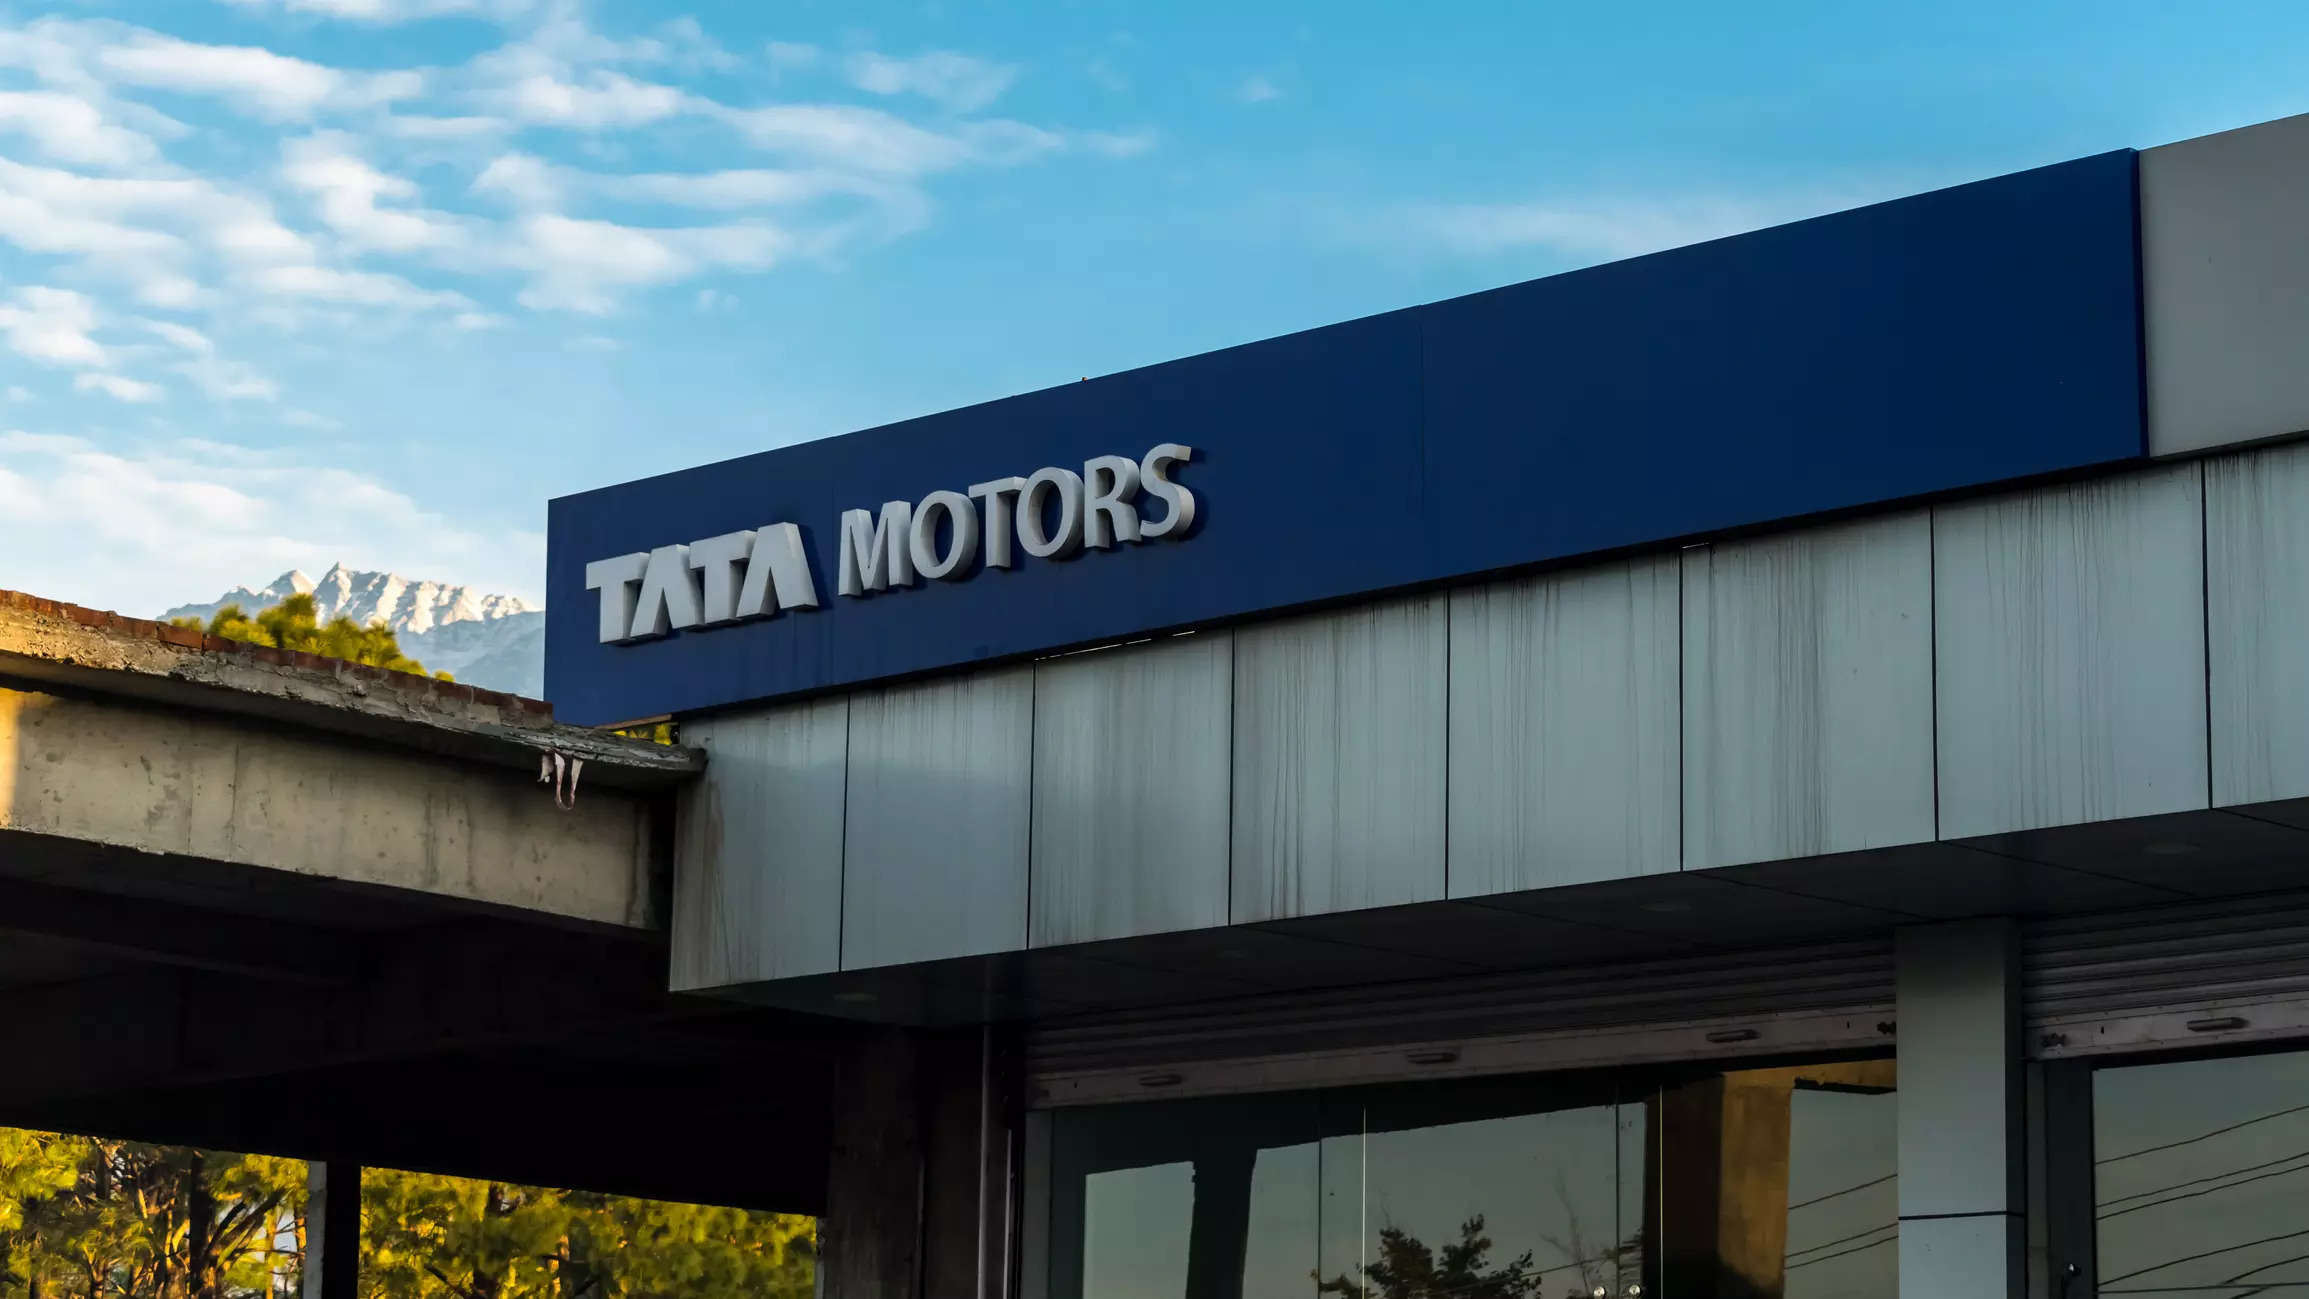  The two automobile giants, therefore, had submitted before the HPC a proposal for Tata Motors' takeover of Ford's plant.